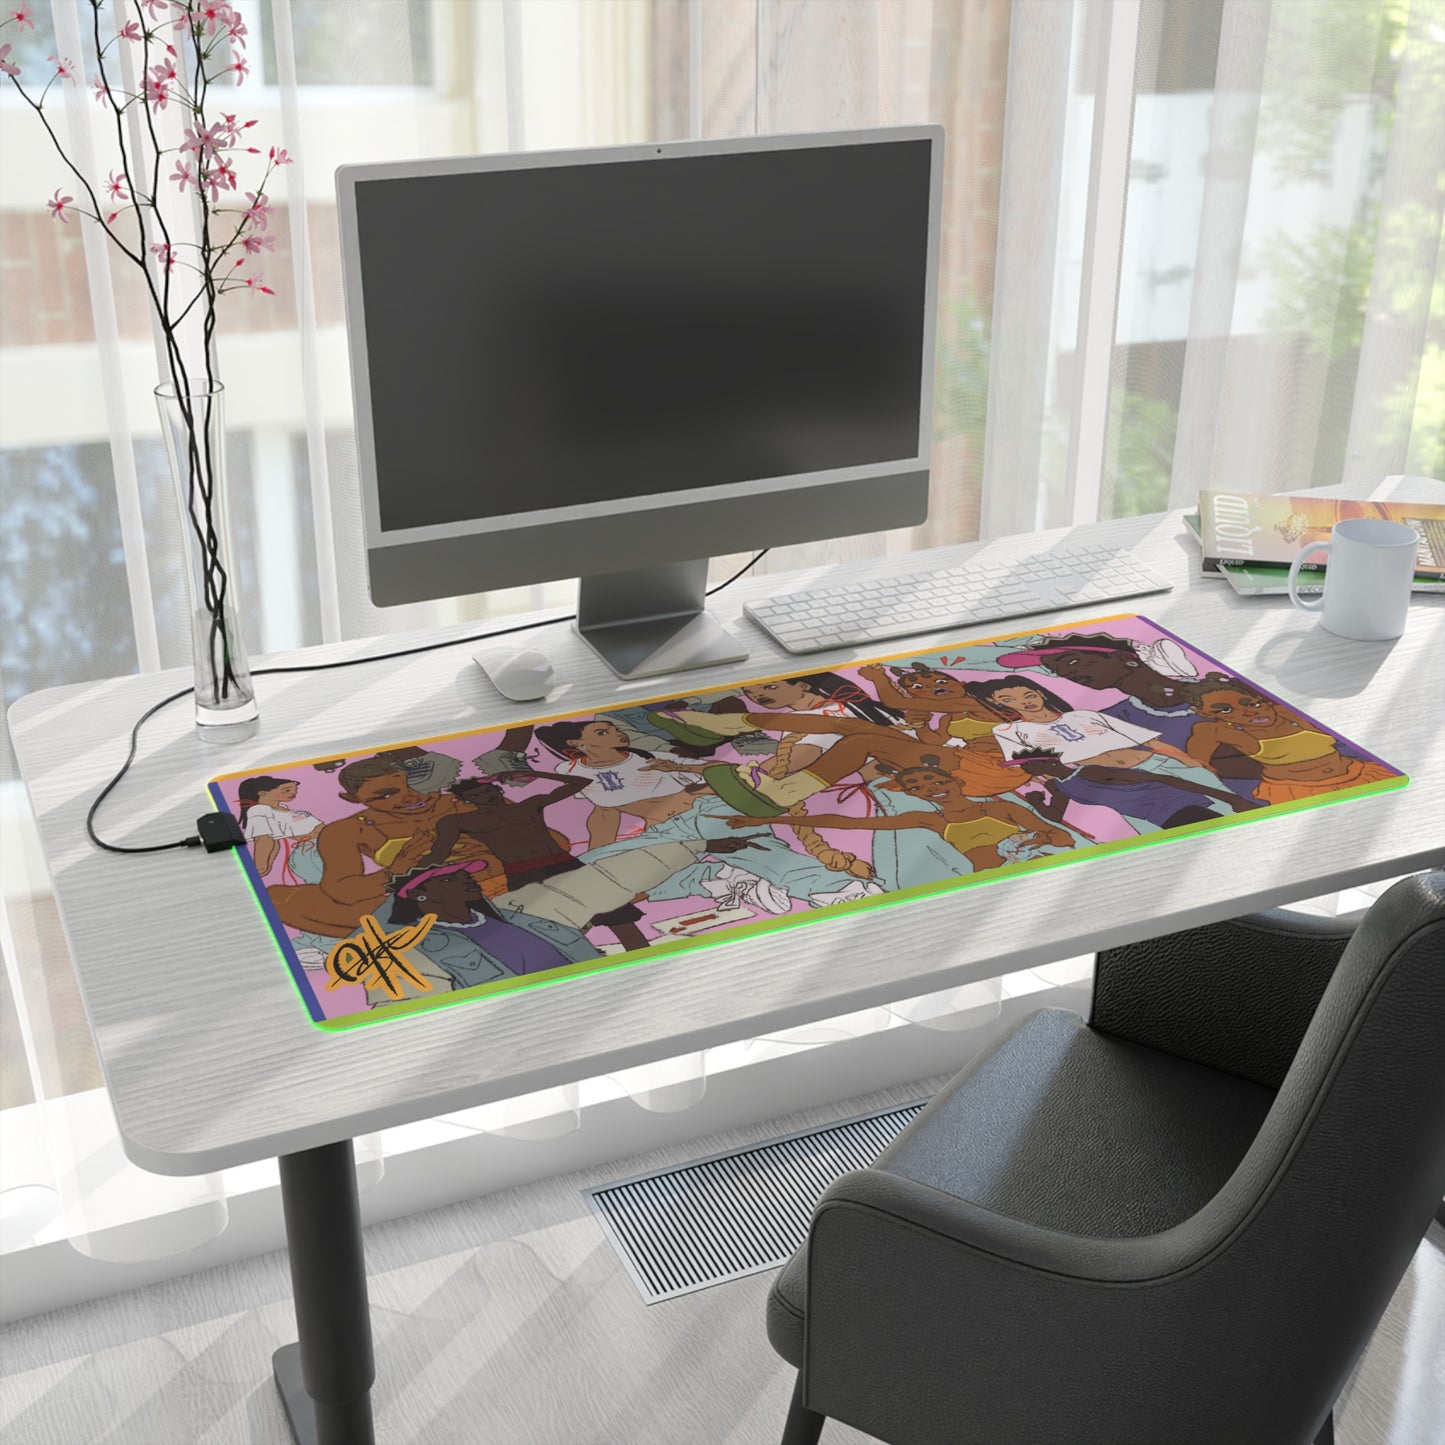 AQSLE Collection LED Gaming Mouse Pad